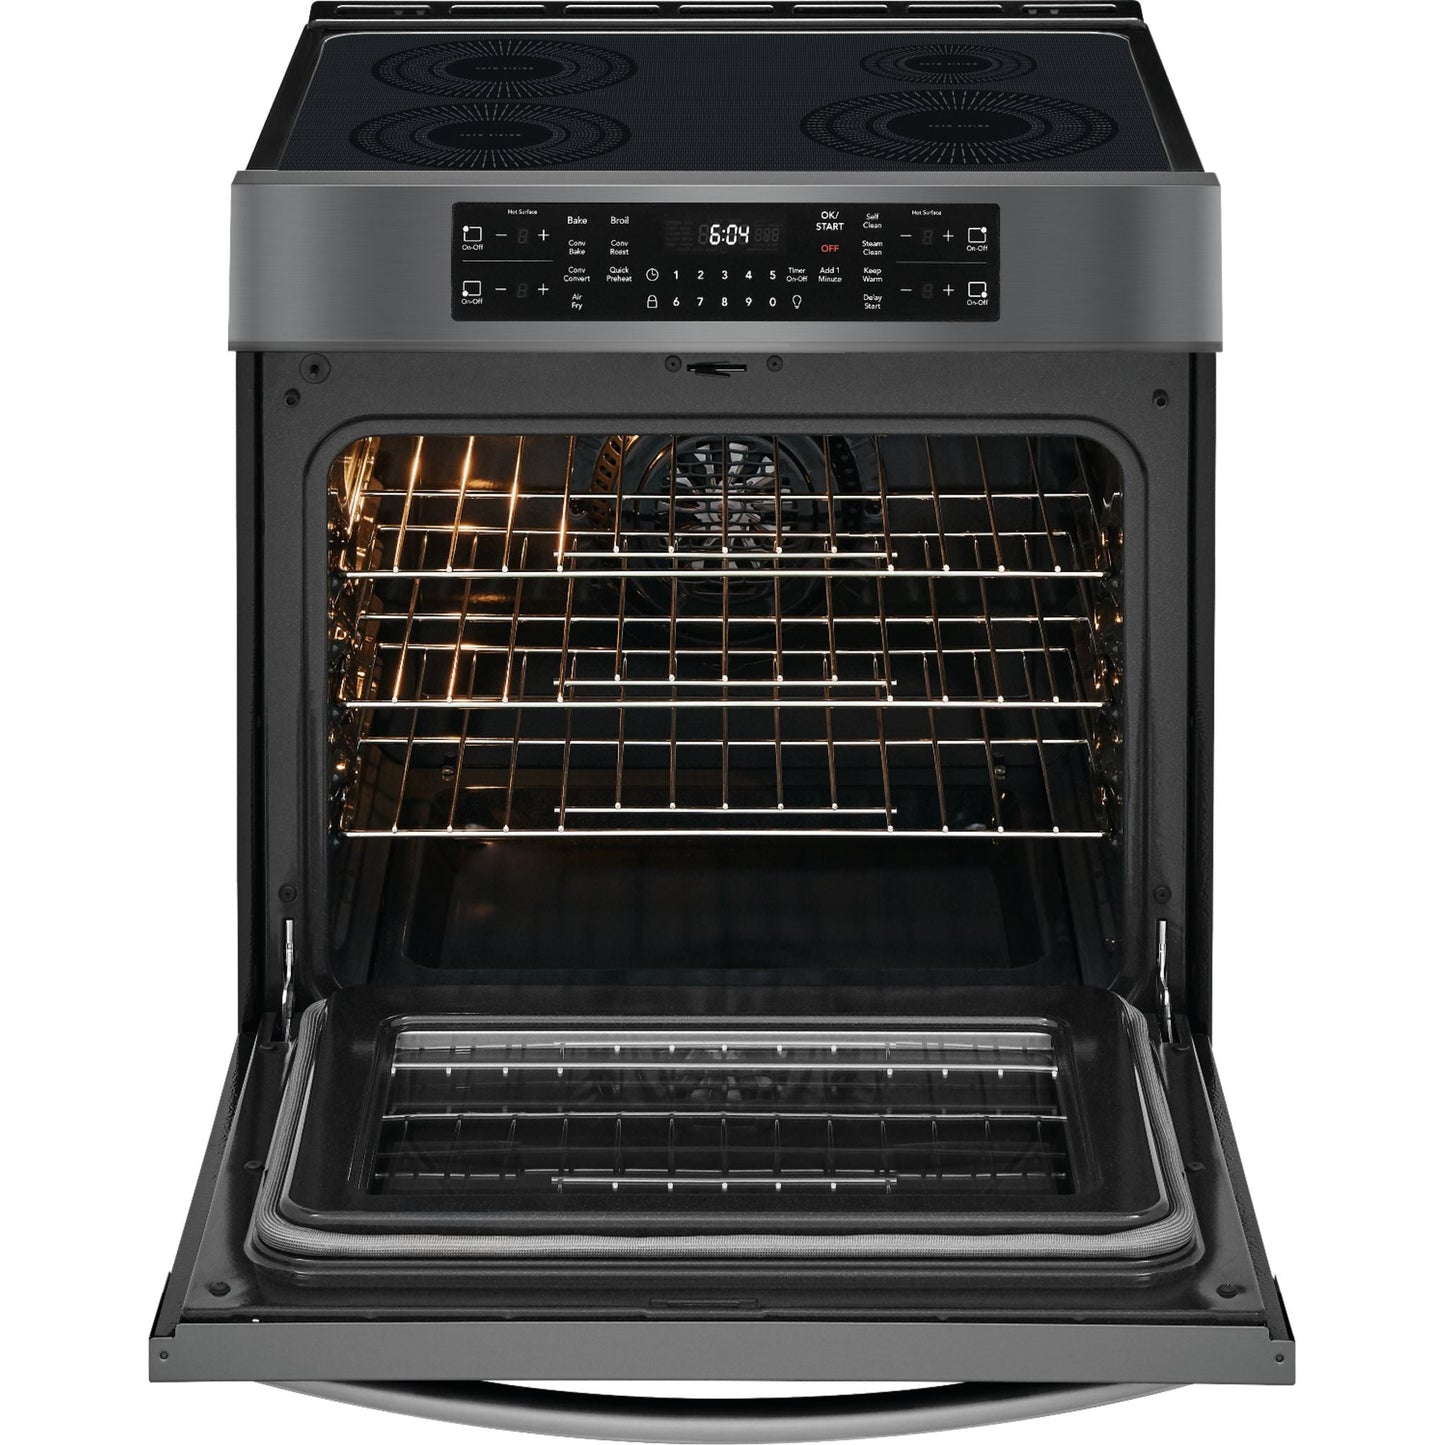 Frigidaire Gallery Front Control Range (CGIH3047VD) - Black Stainless